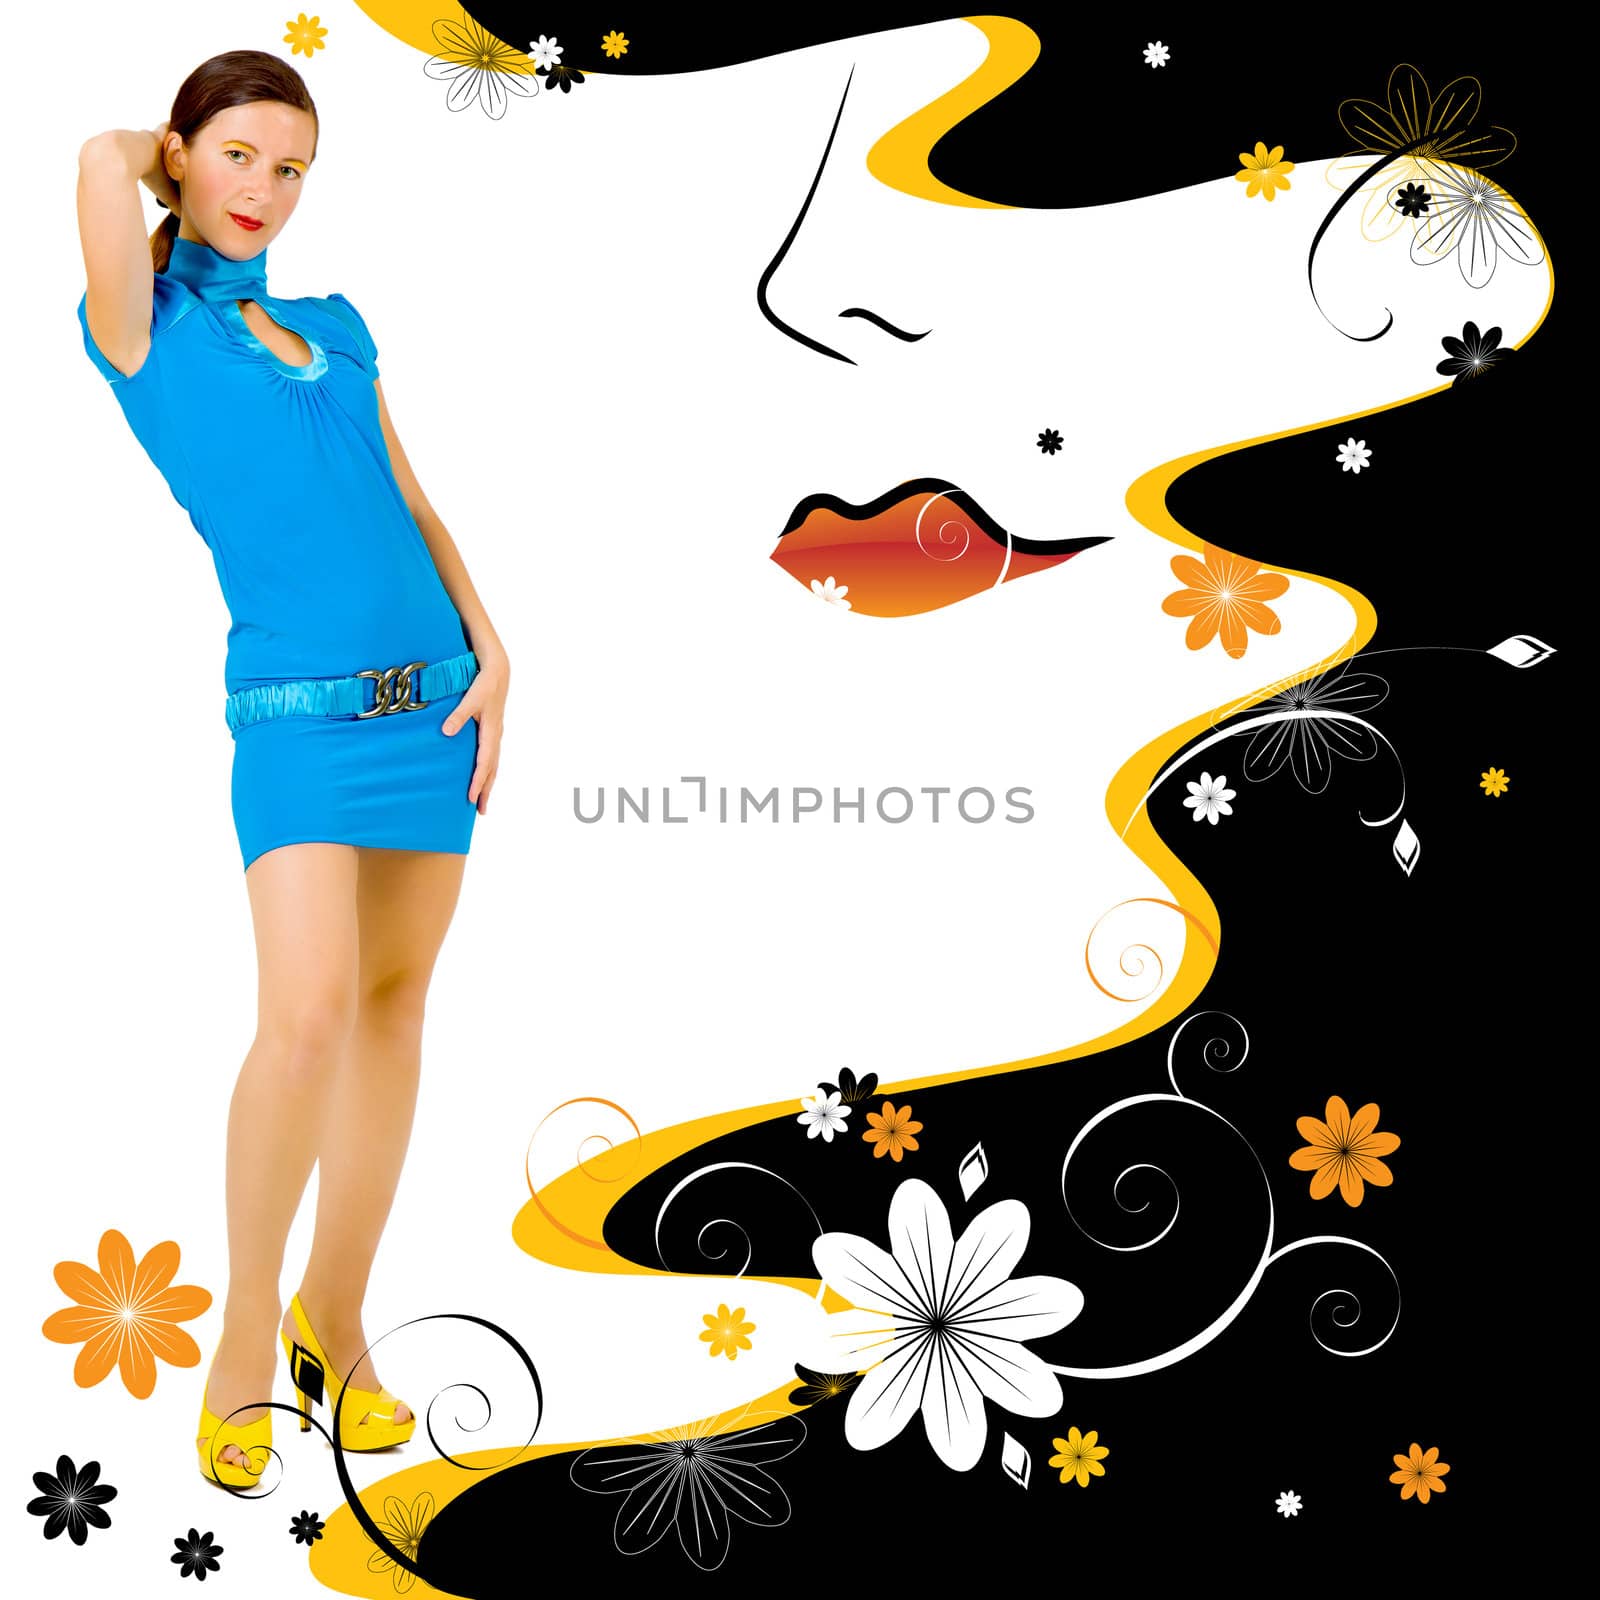 Fashion girl with the illustrated floral background
